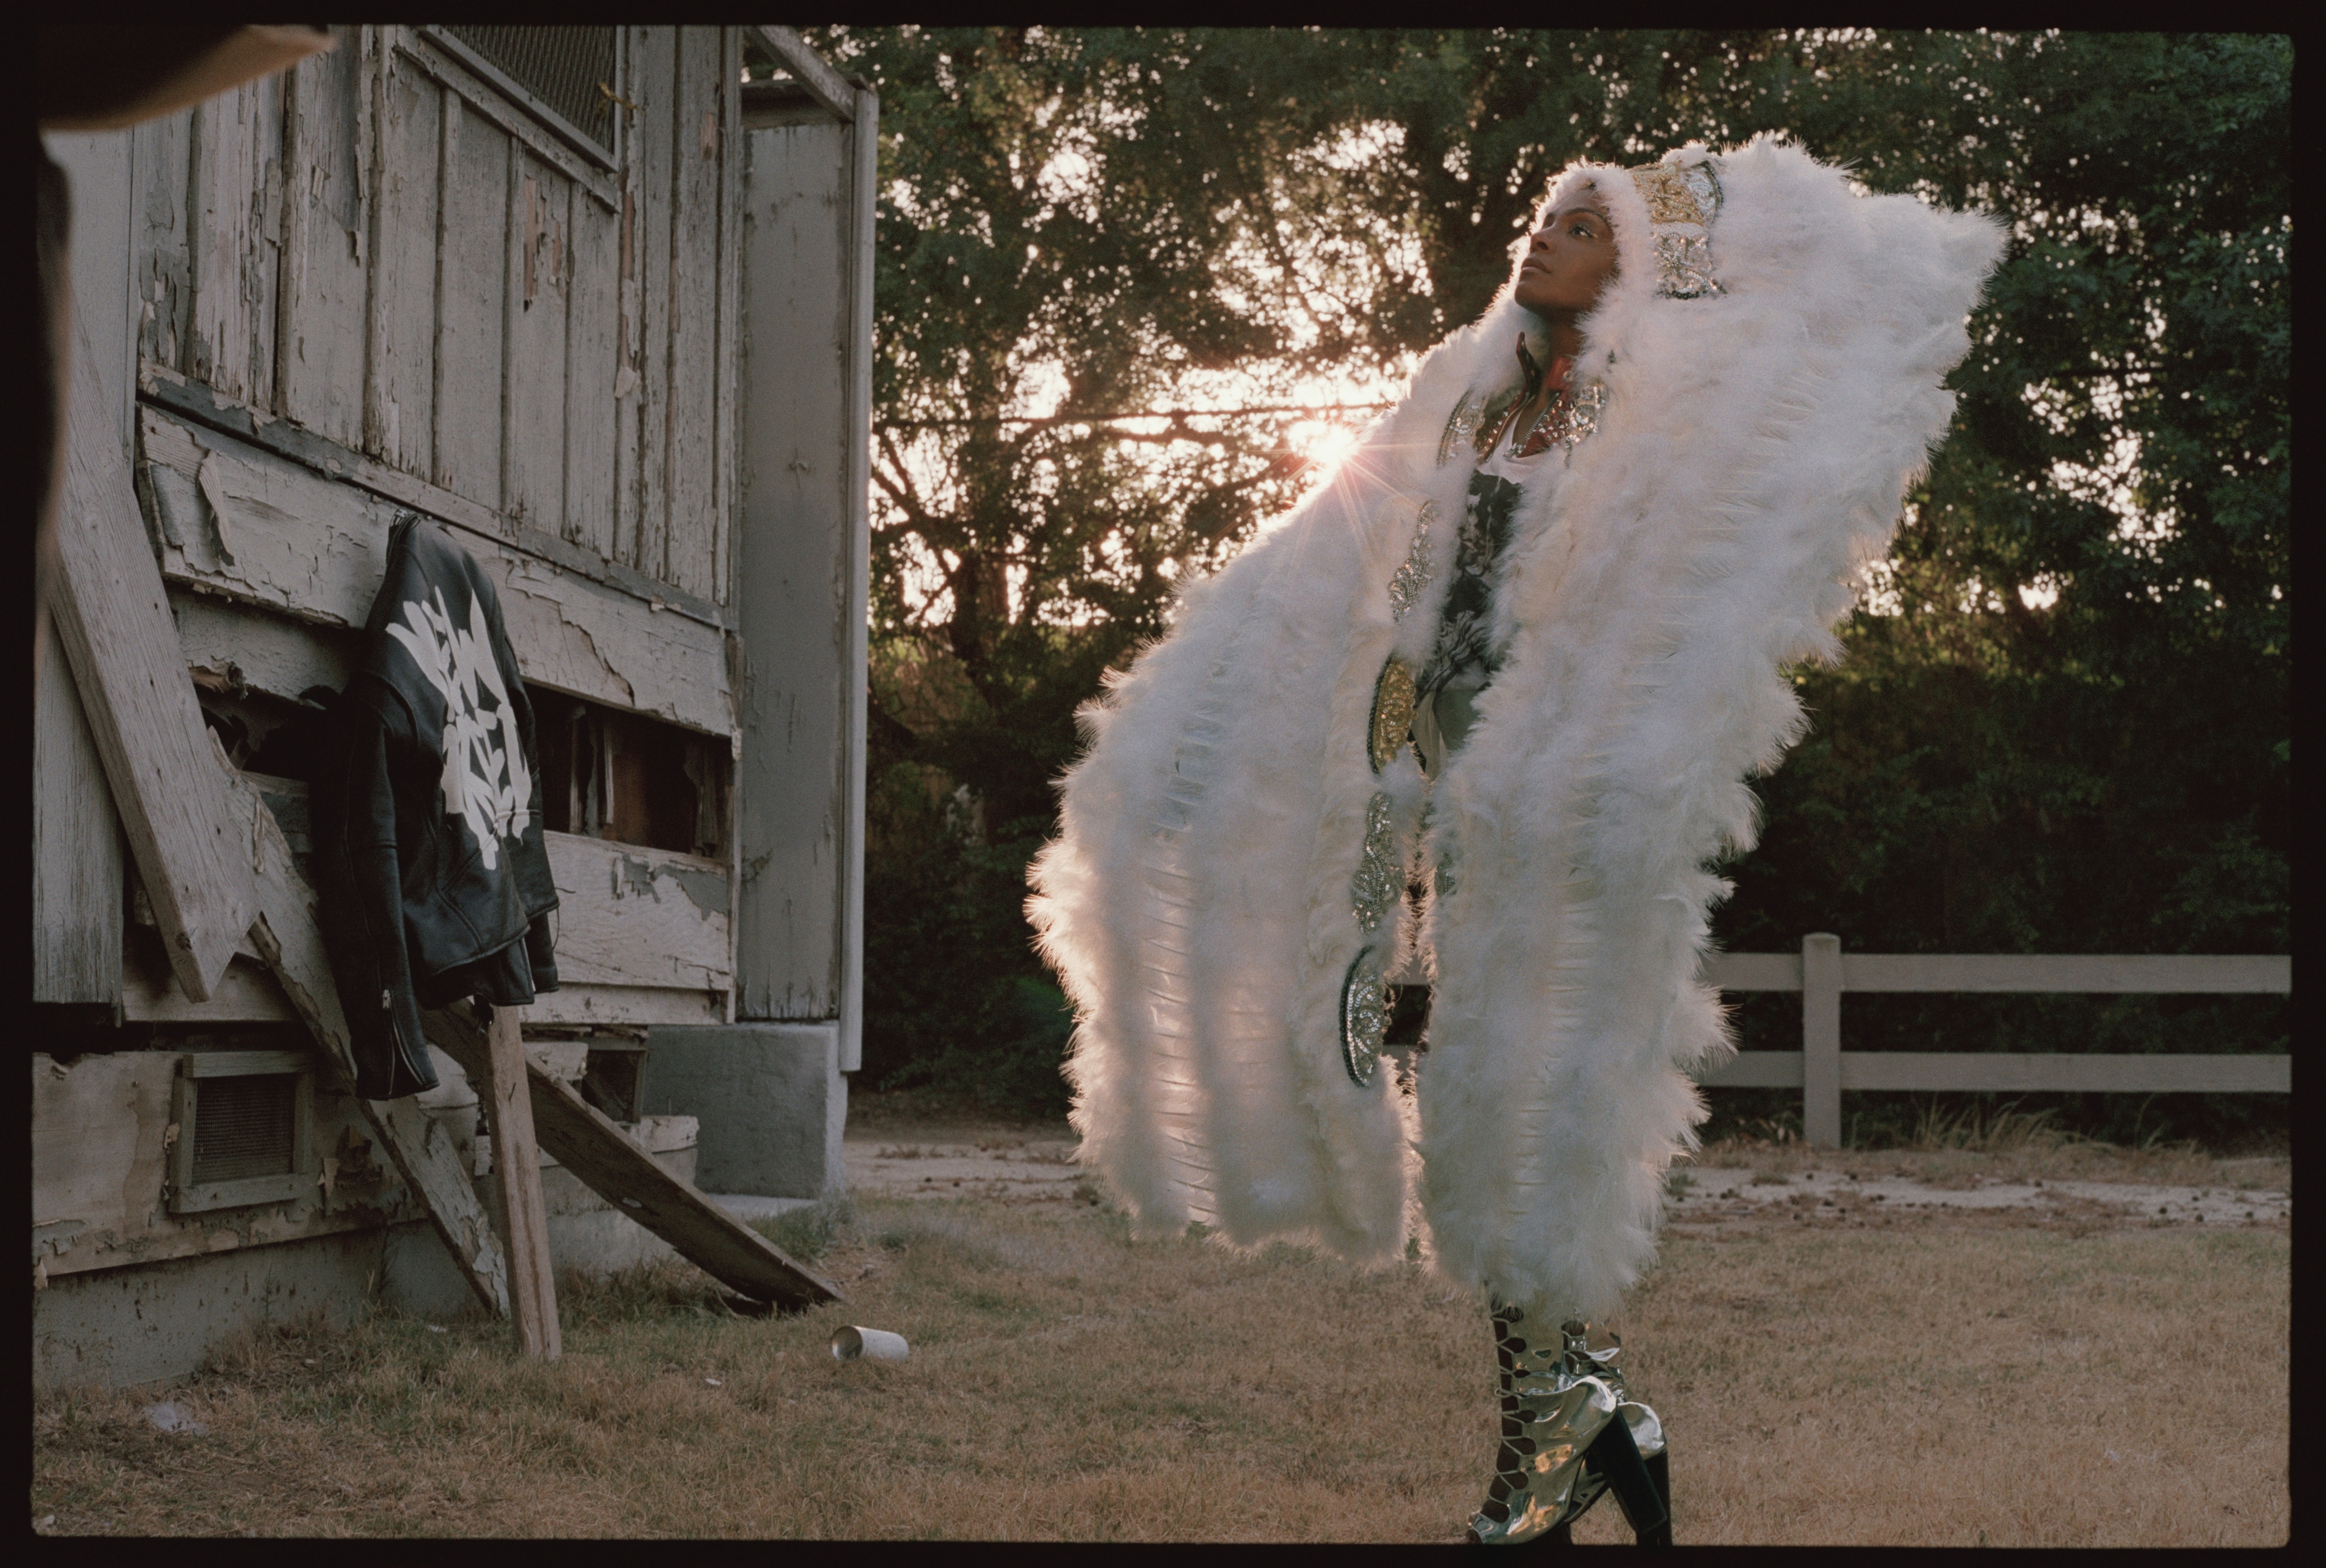 Dawn Richard on New Orleans, black love, and ‘new breed’